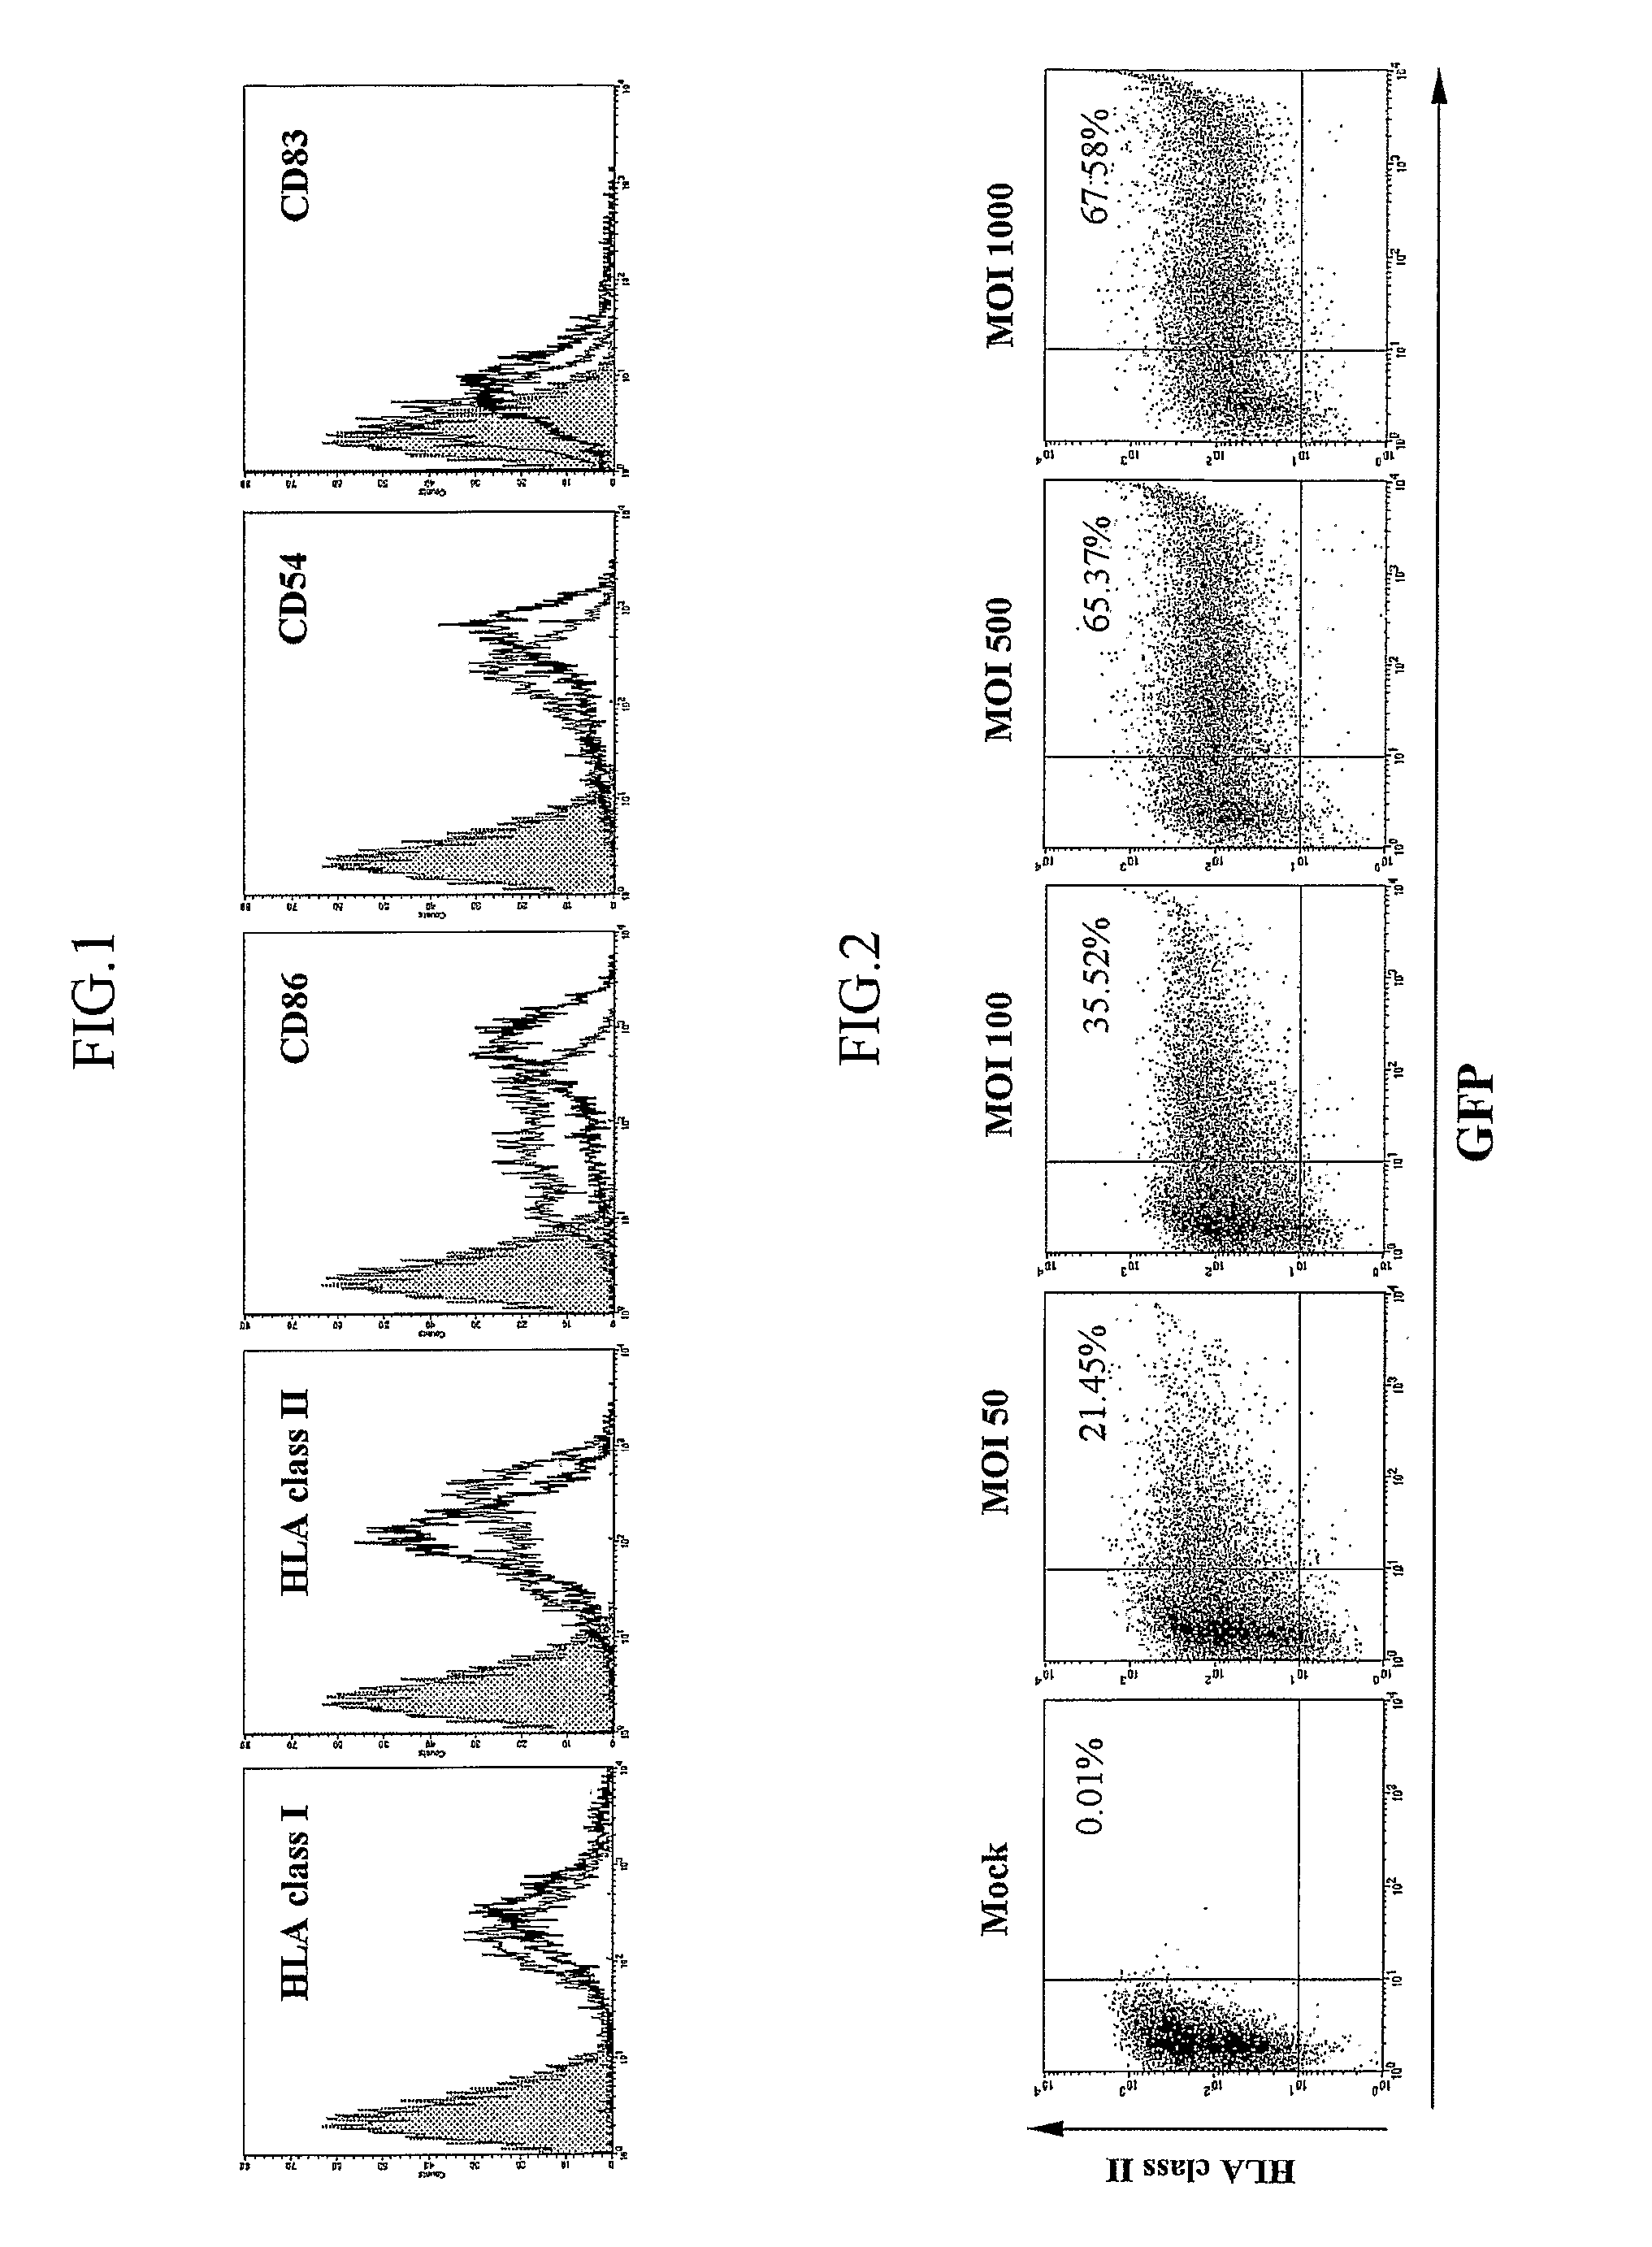 Dendrite cells transduced with recombinant adenovirus AdVCEA which generate CEA-specific cytotoxic T lymphocytes, vaccine and pharmaceutical composition comprising the same